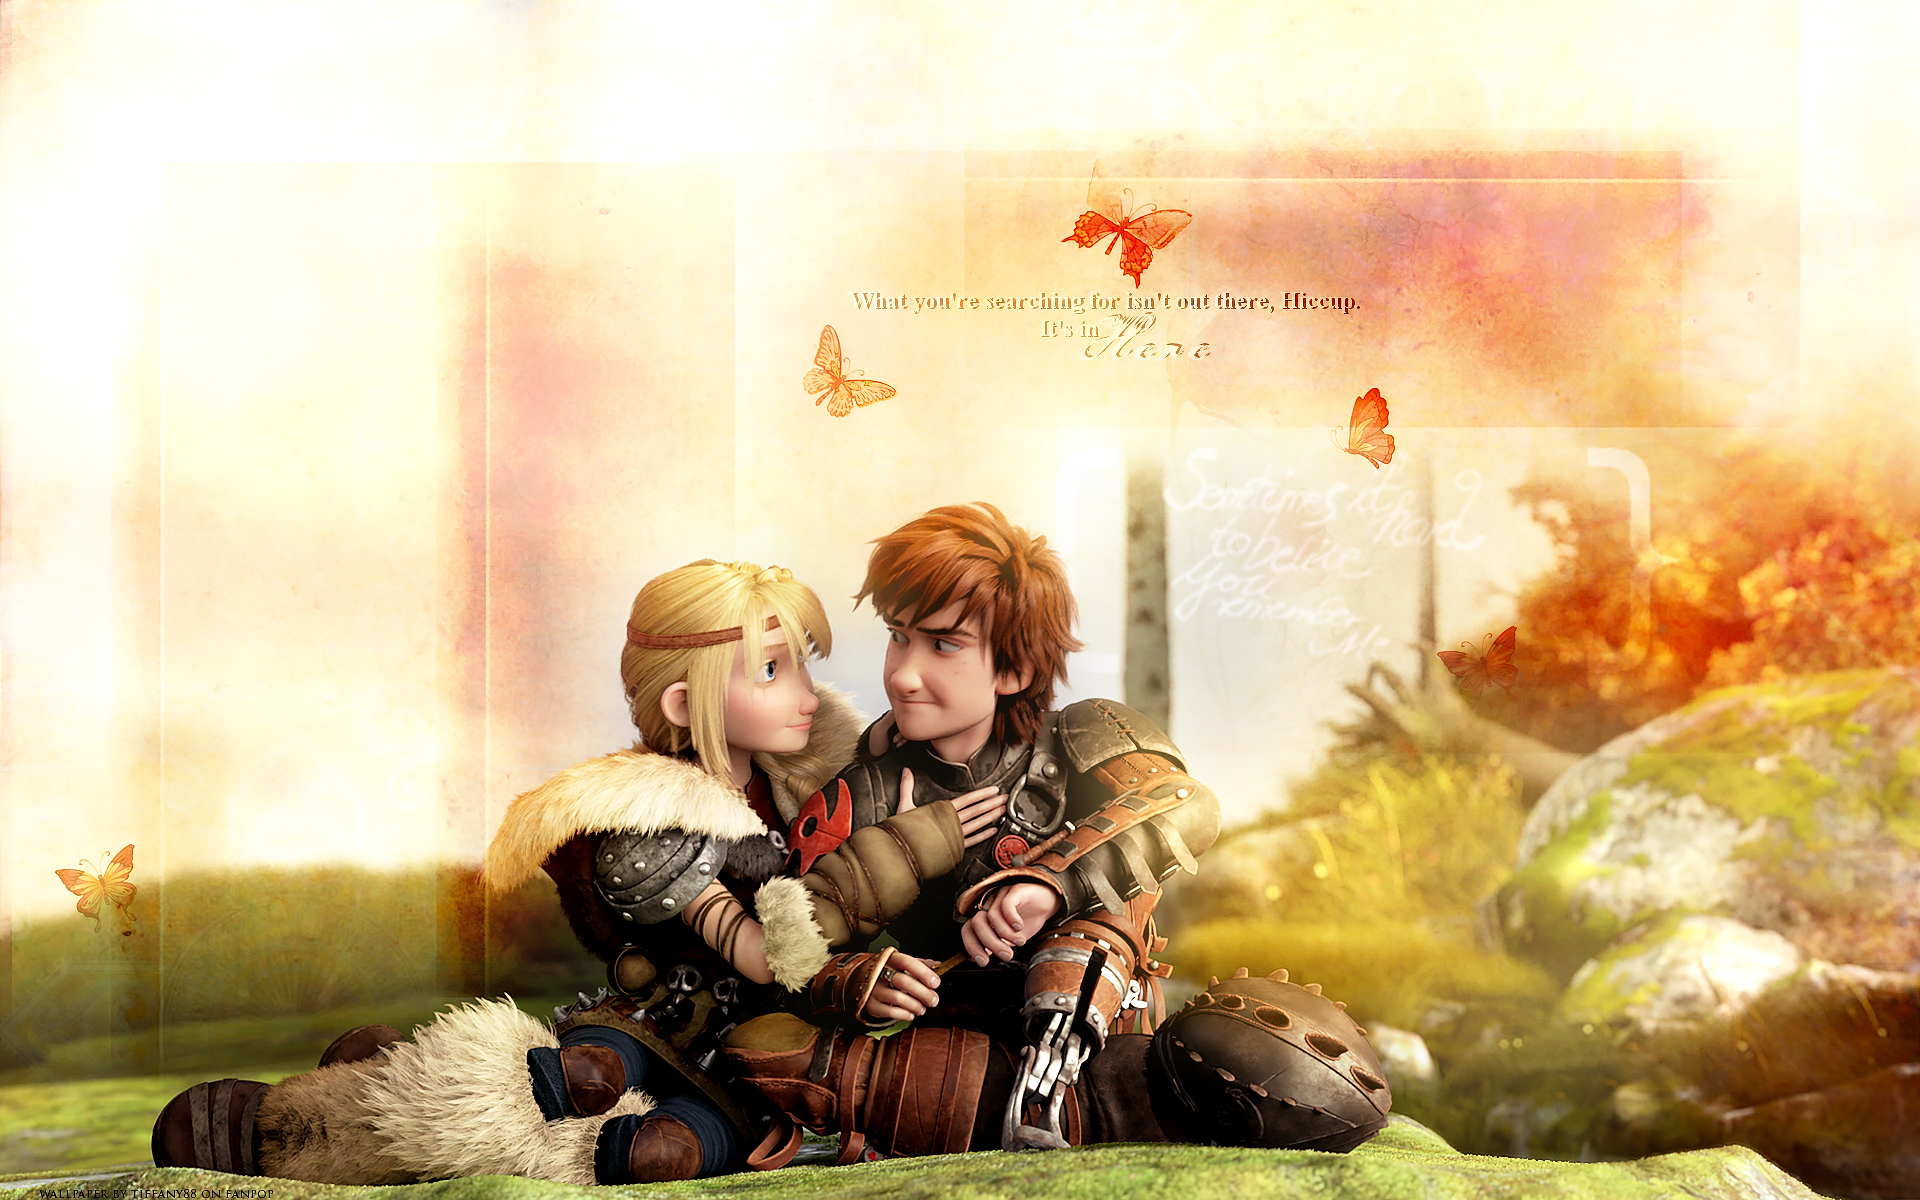 Astrid And Hiccup - Train Your Dragon Hiccup And Astrid , HD Wallpaper & Backgrounds